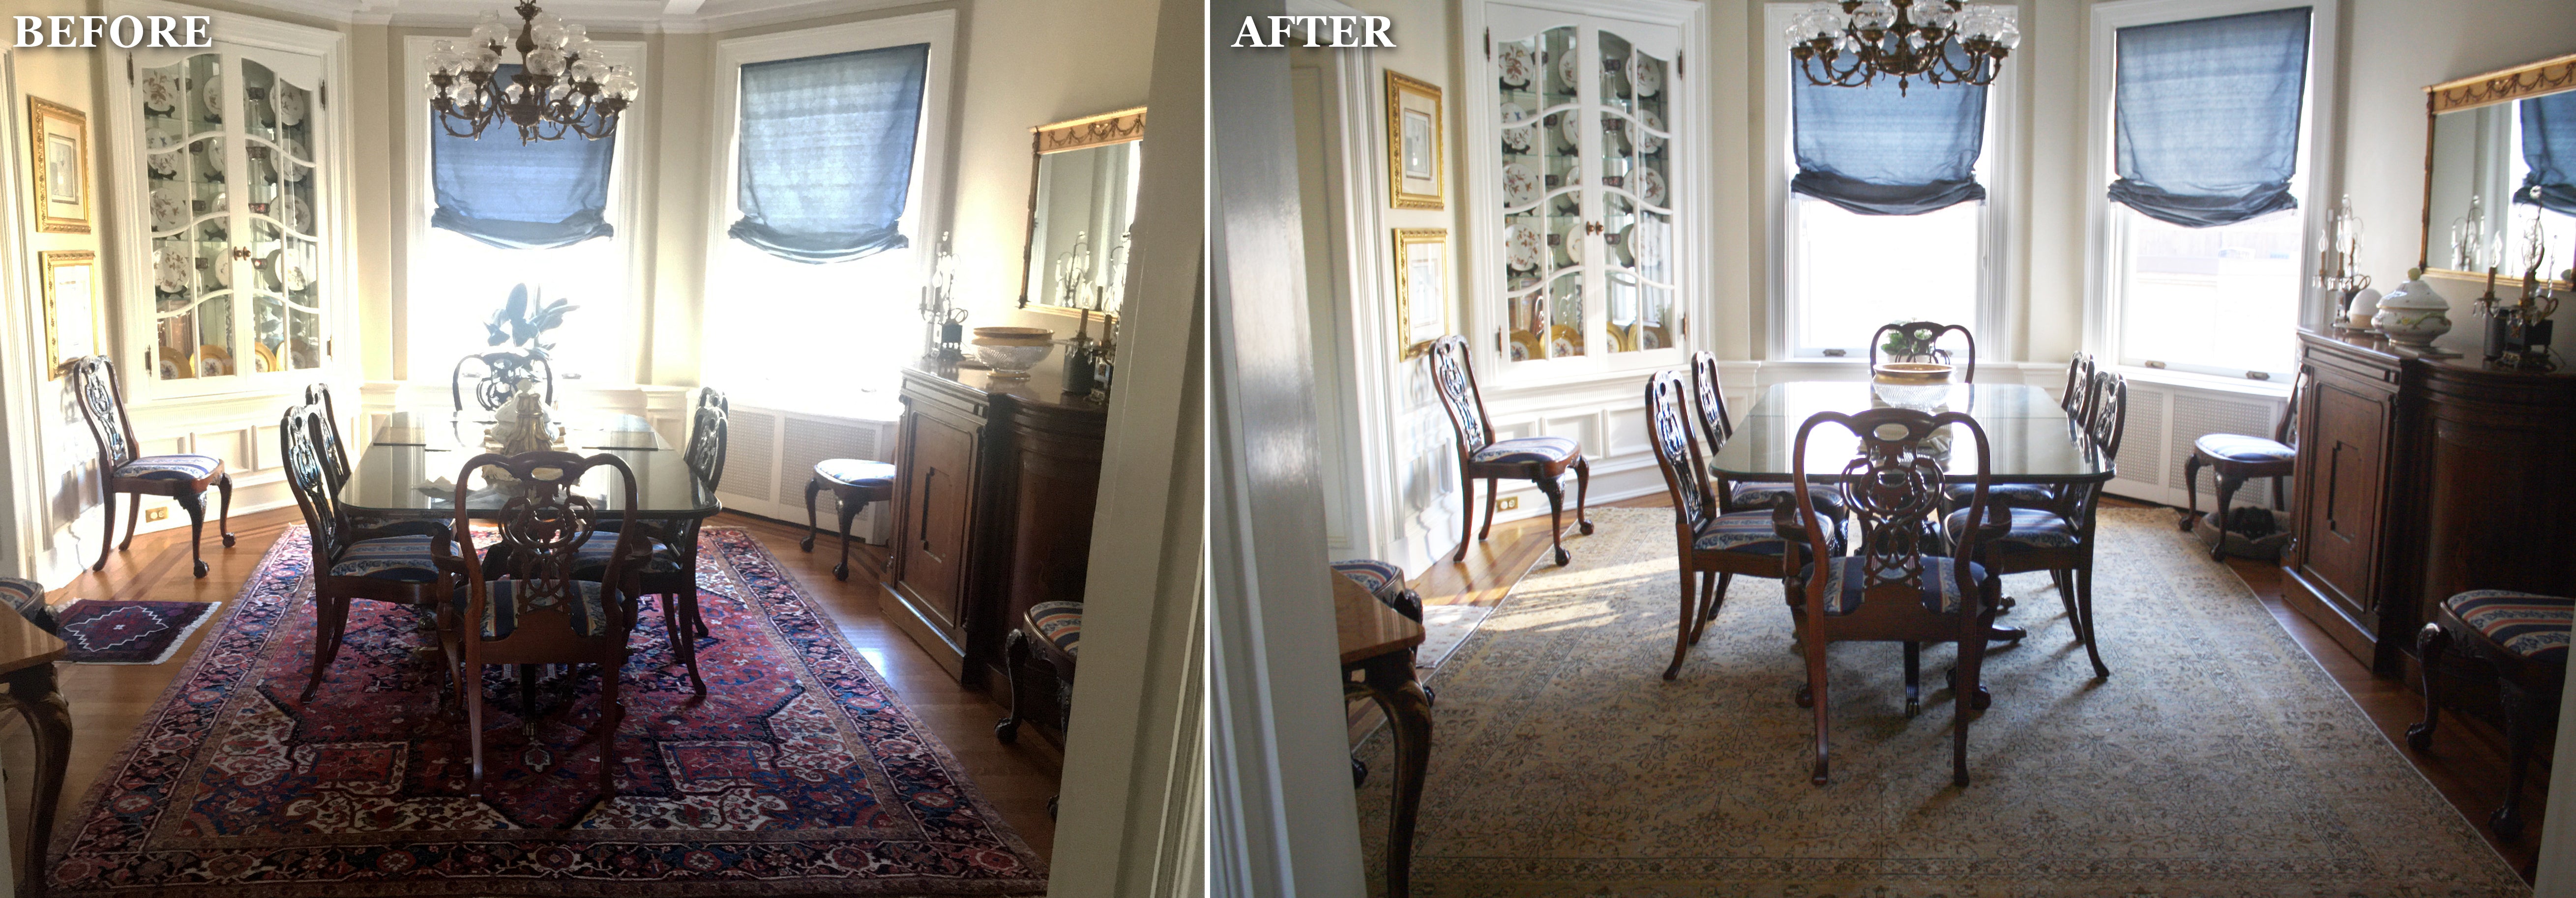 Dining room before and after with rug